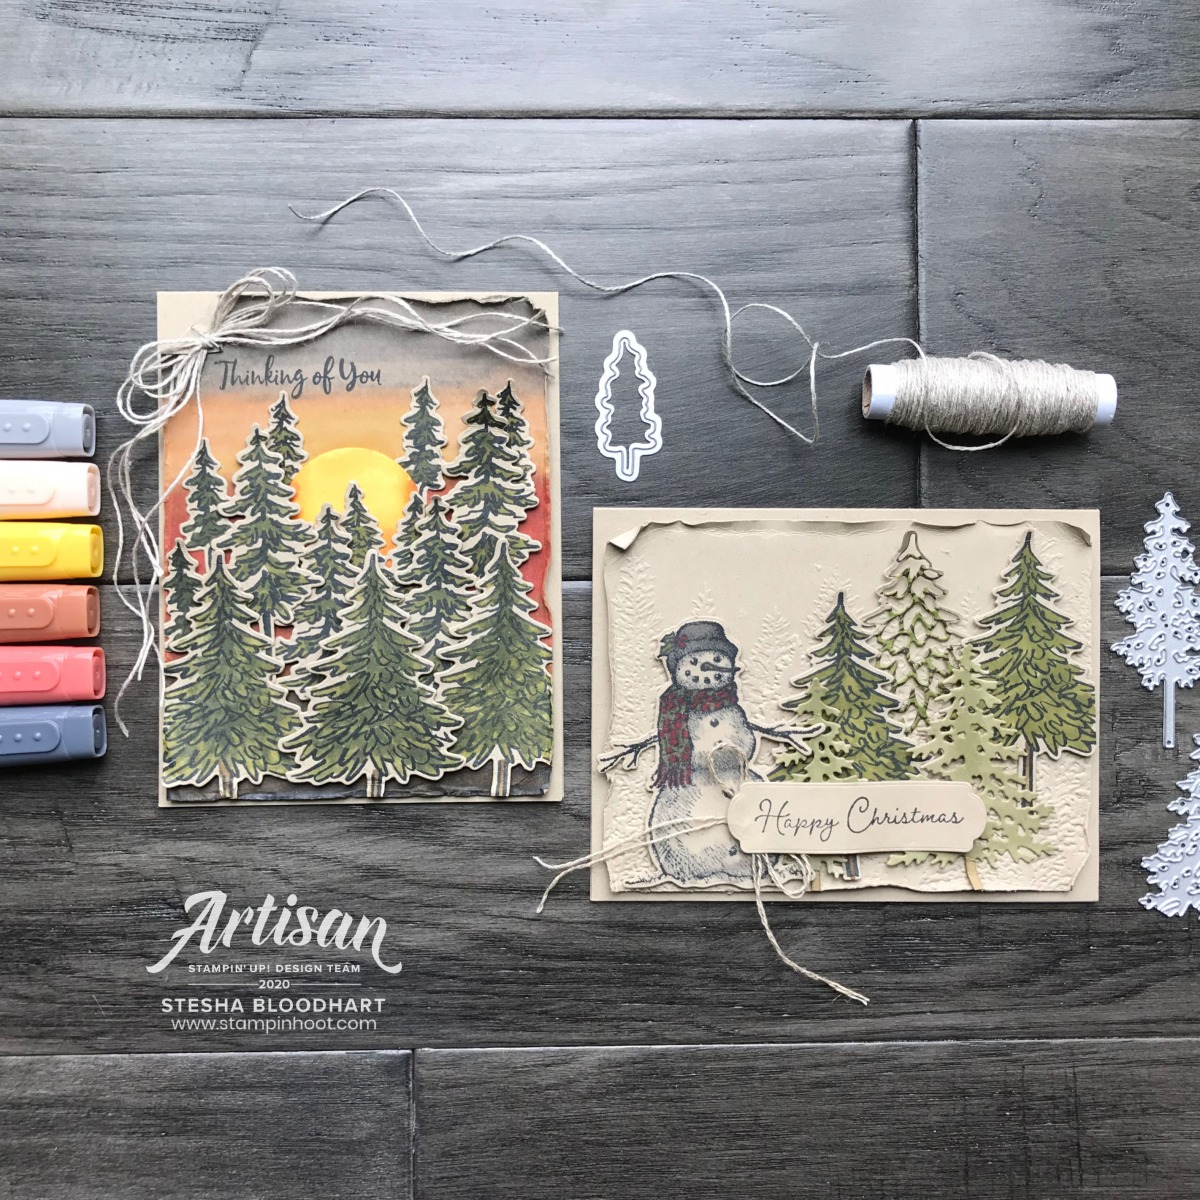 Create these cards using the In the Pines and Snow Wonder Bundles from Stampin' Up! 2020 Artisan Blog Hop, Stesha Bloodhart, Stampin' Hoot!